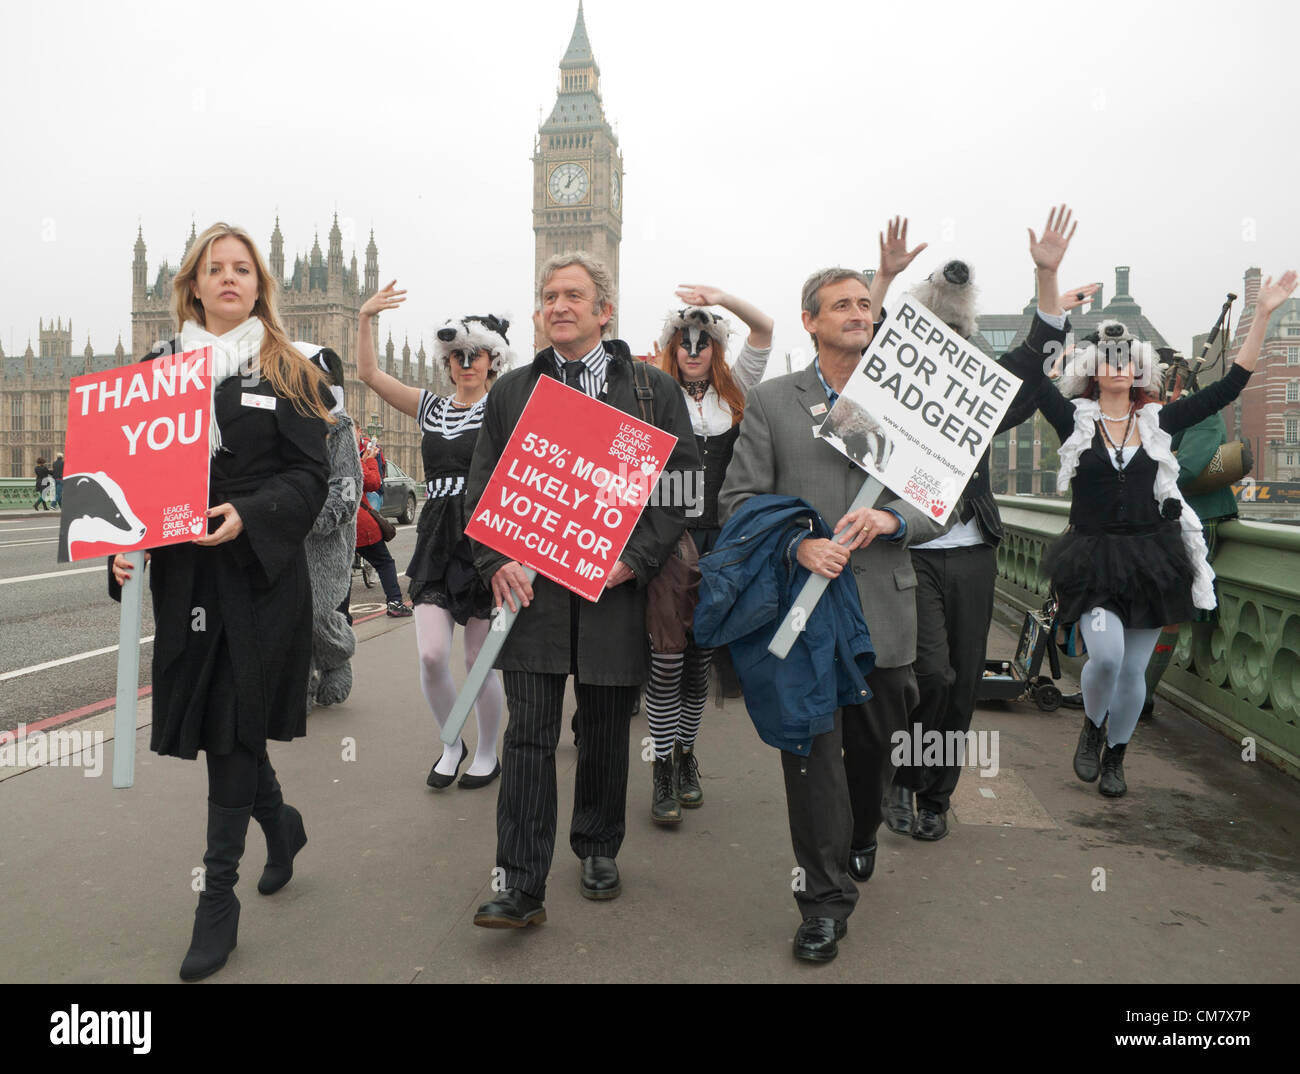 24/10/2012, London UK. Members of League Against Cruel Sports, including Chief Executive Joe Duckworth,(centre) walk along Westminster Bridge backed by The Artful Badger dance troupe, before heading to Parliament and lobbying MP's to stop the culling of badgers. Planned badger culls, called to prevent the spread of bovine TB from badgers to cattle, have been postponed until 2013 but badger supporters have called for the cull to be stopped entirely. Stock Photo